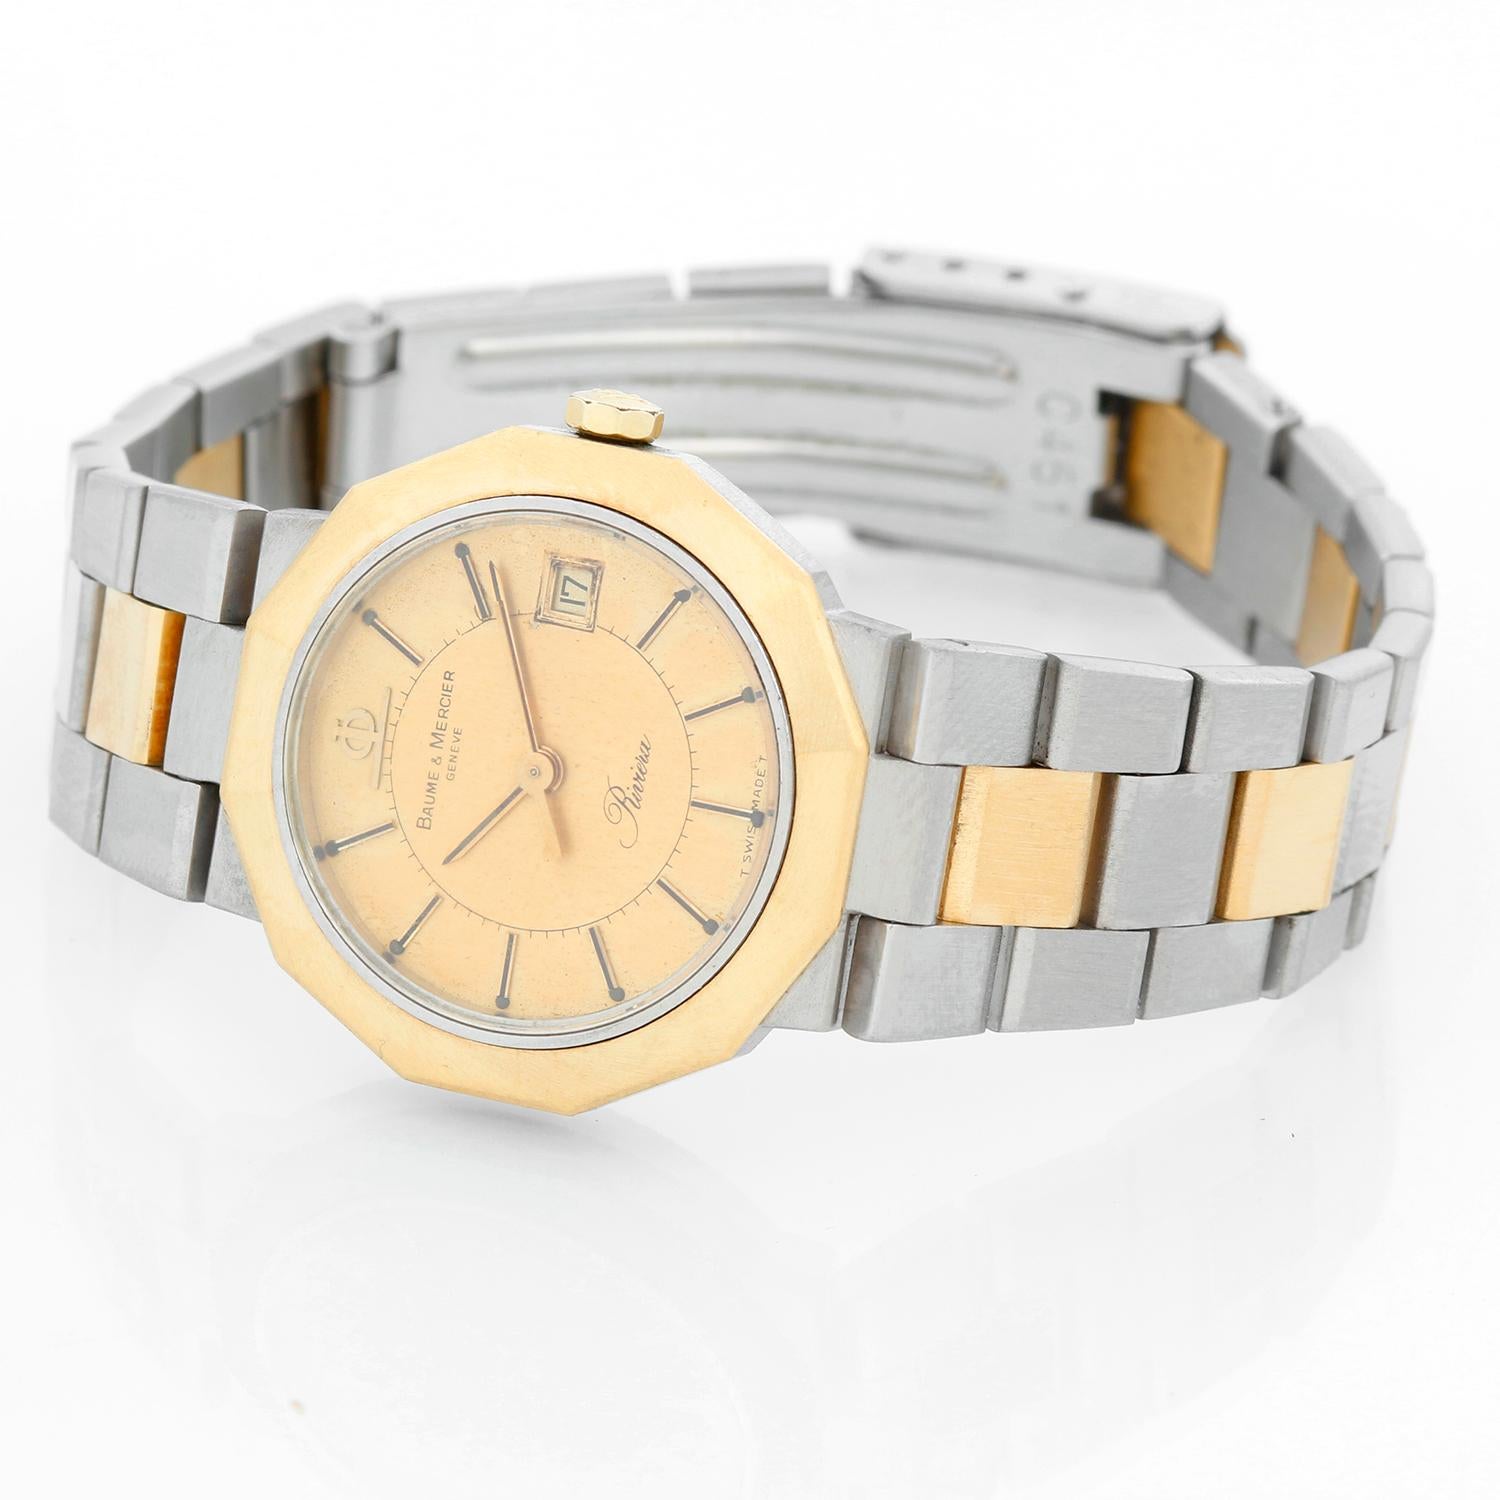 Baume & Mercier 18K Yellow Gold and Stainless Steel Vintage Watch - Quartz. Stainless steel and 18k yellow gold smooth bezel. Champagne dial with date at 3 o'clock. Two-toned link bracelet. Pre-owned with custom box .